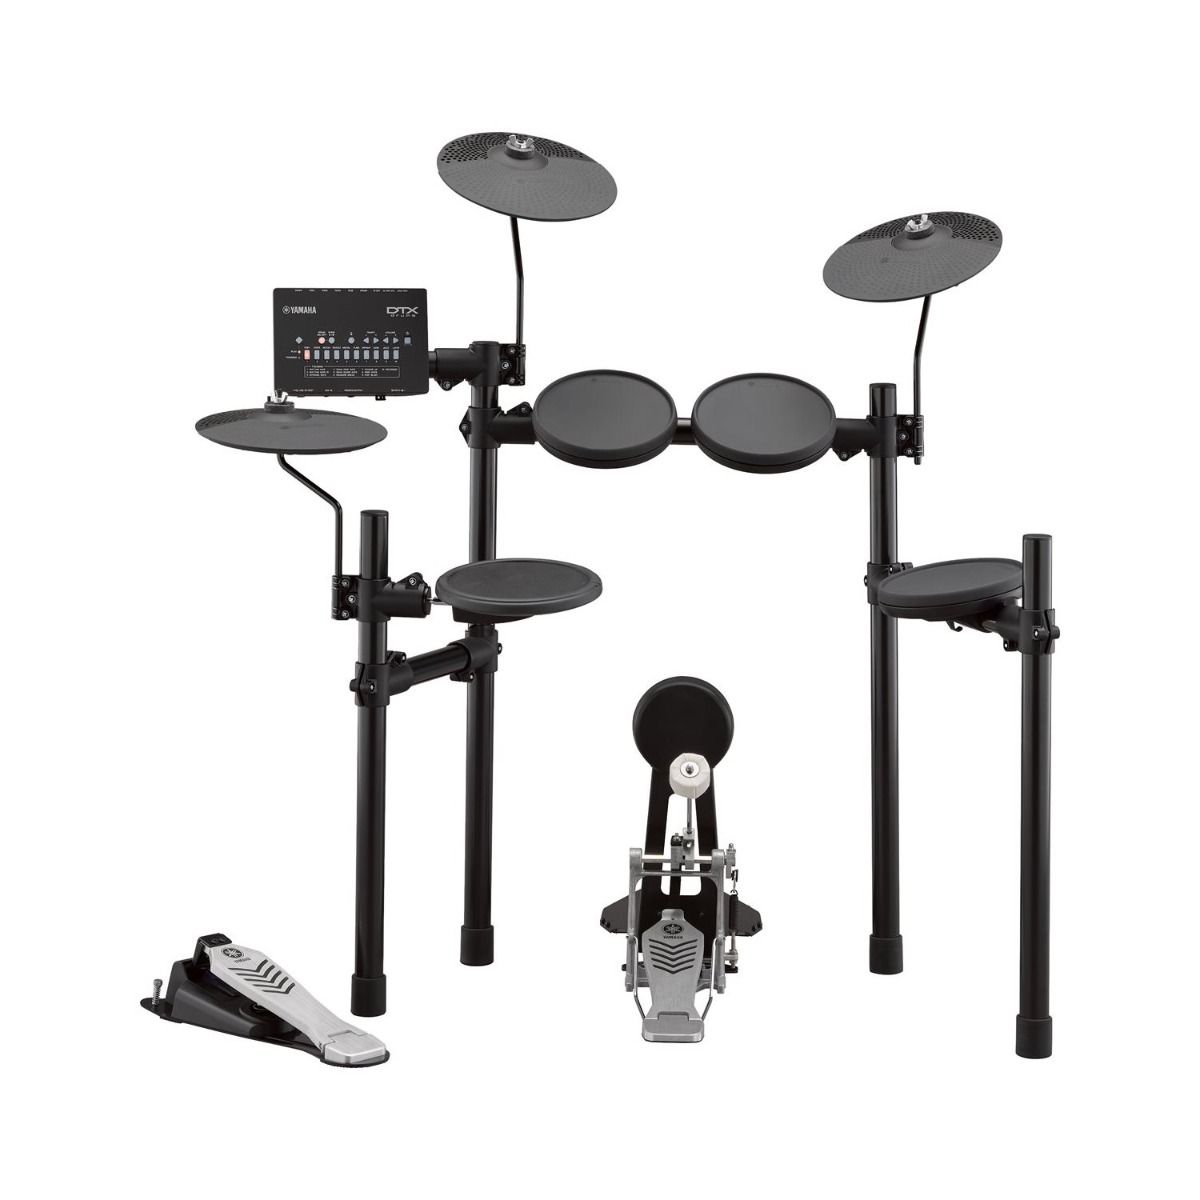 YAMAHA DTX452K95 Electronic Drum Kit Bundle (Dtx452k With Extra Pcy95at Cymbal)